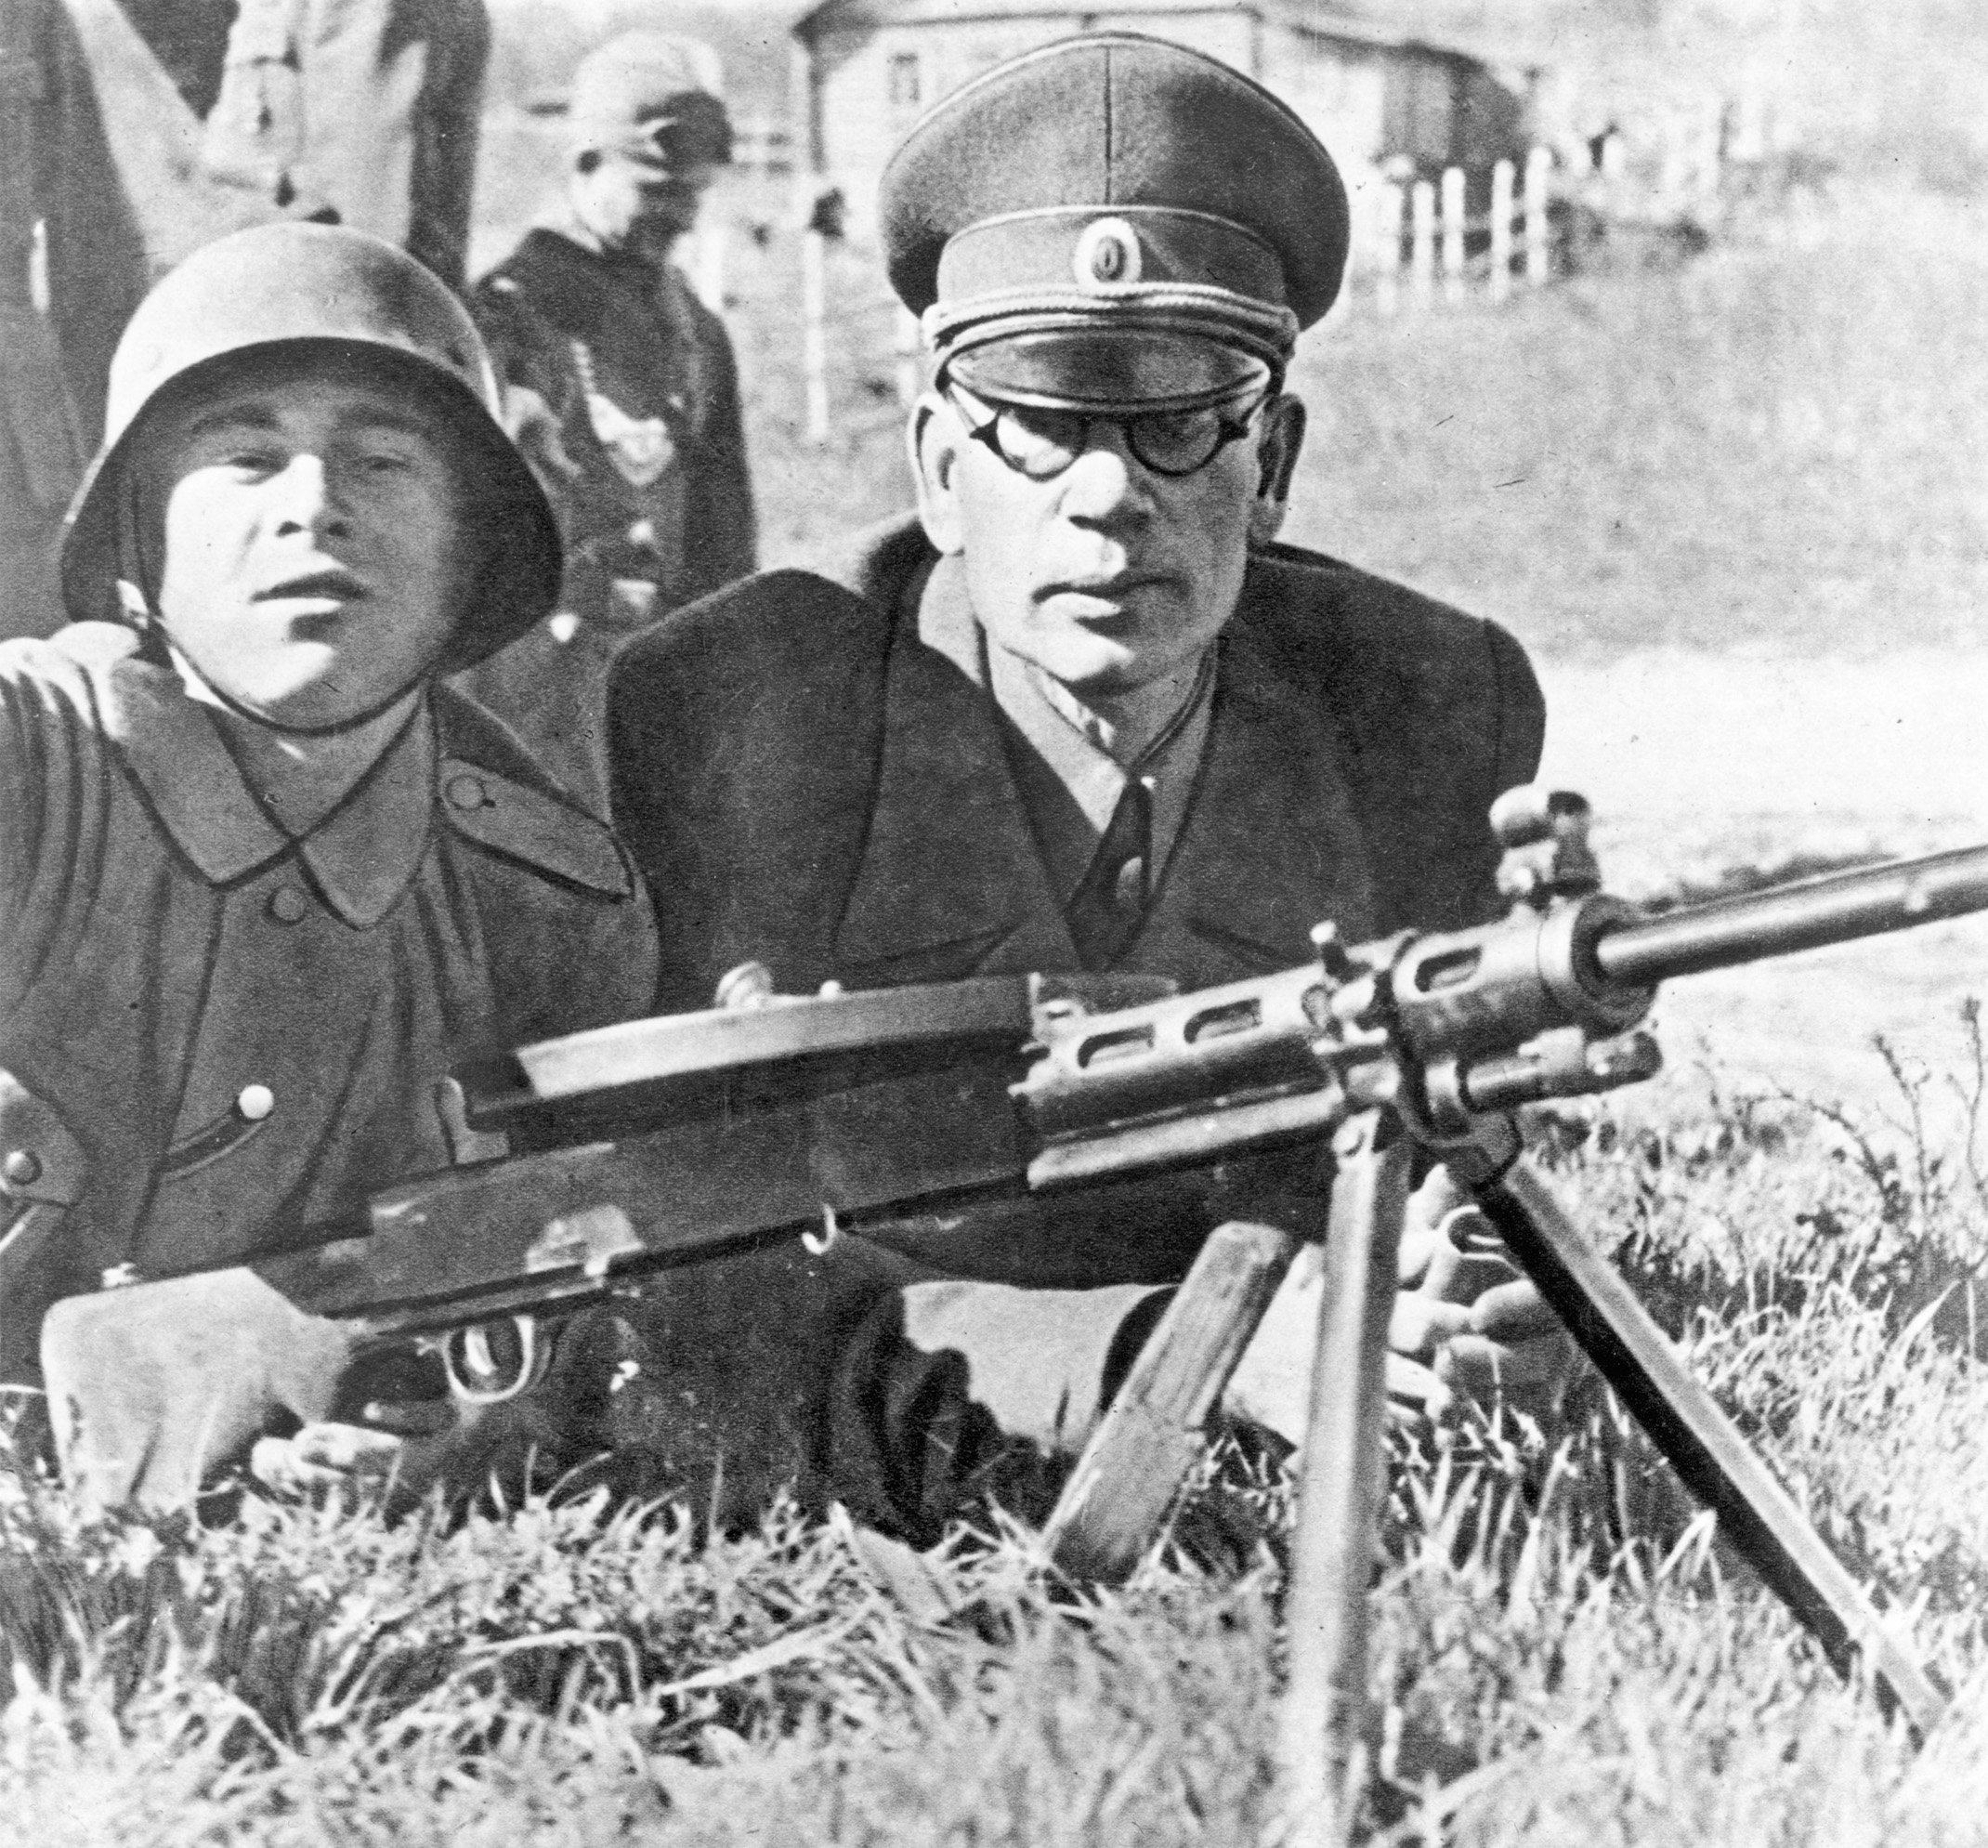 Former Bolshevik commander General Andrei Vlasov (right) turned against Moscow’s Stalinist regime and raised an army to fight with the Germans. Here, the general poses with a recruit during training.